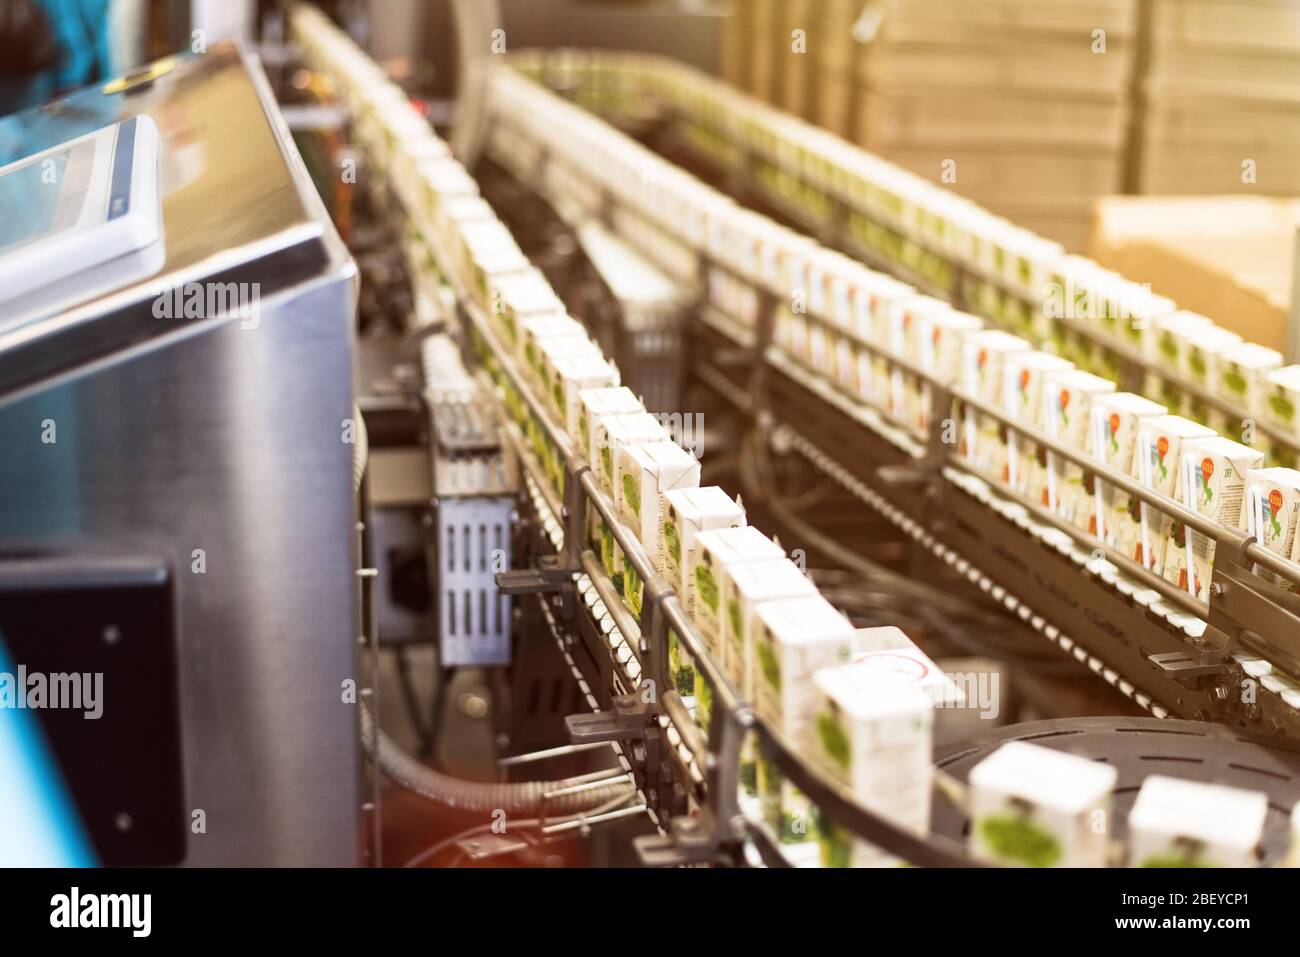 Conveyor with box for juice or water. Conveyor at the plant for the production and bottling of juices in cardboard packaging Stock Photo